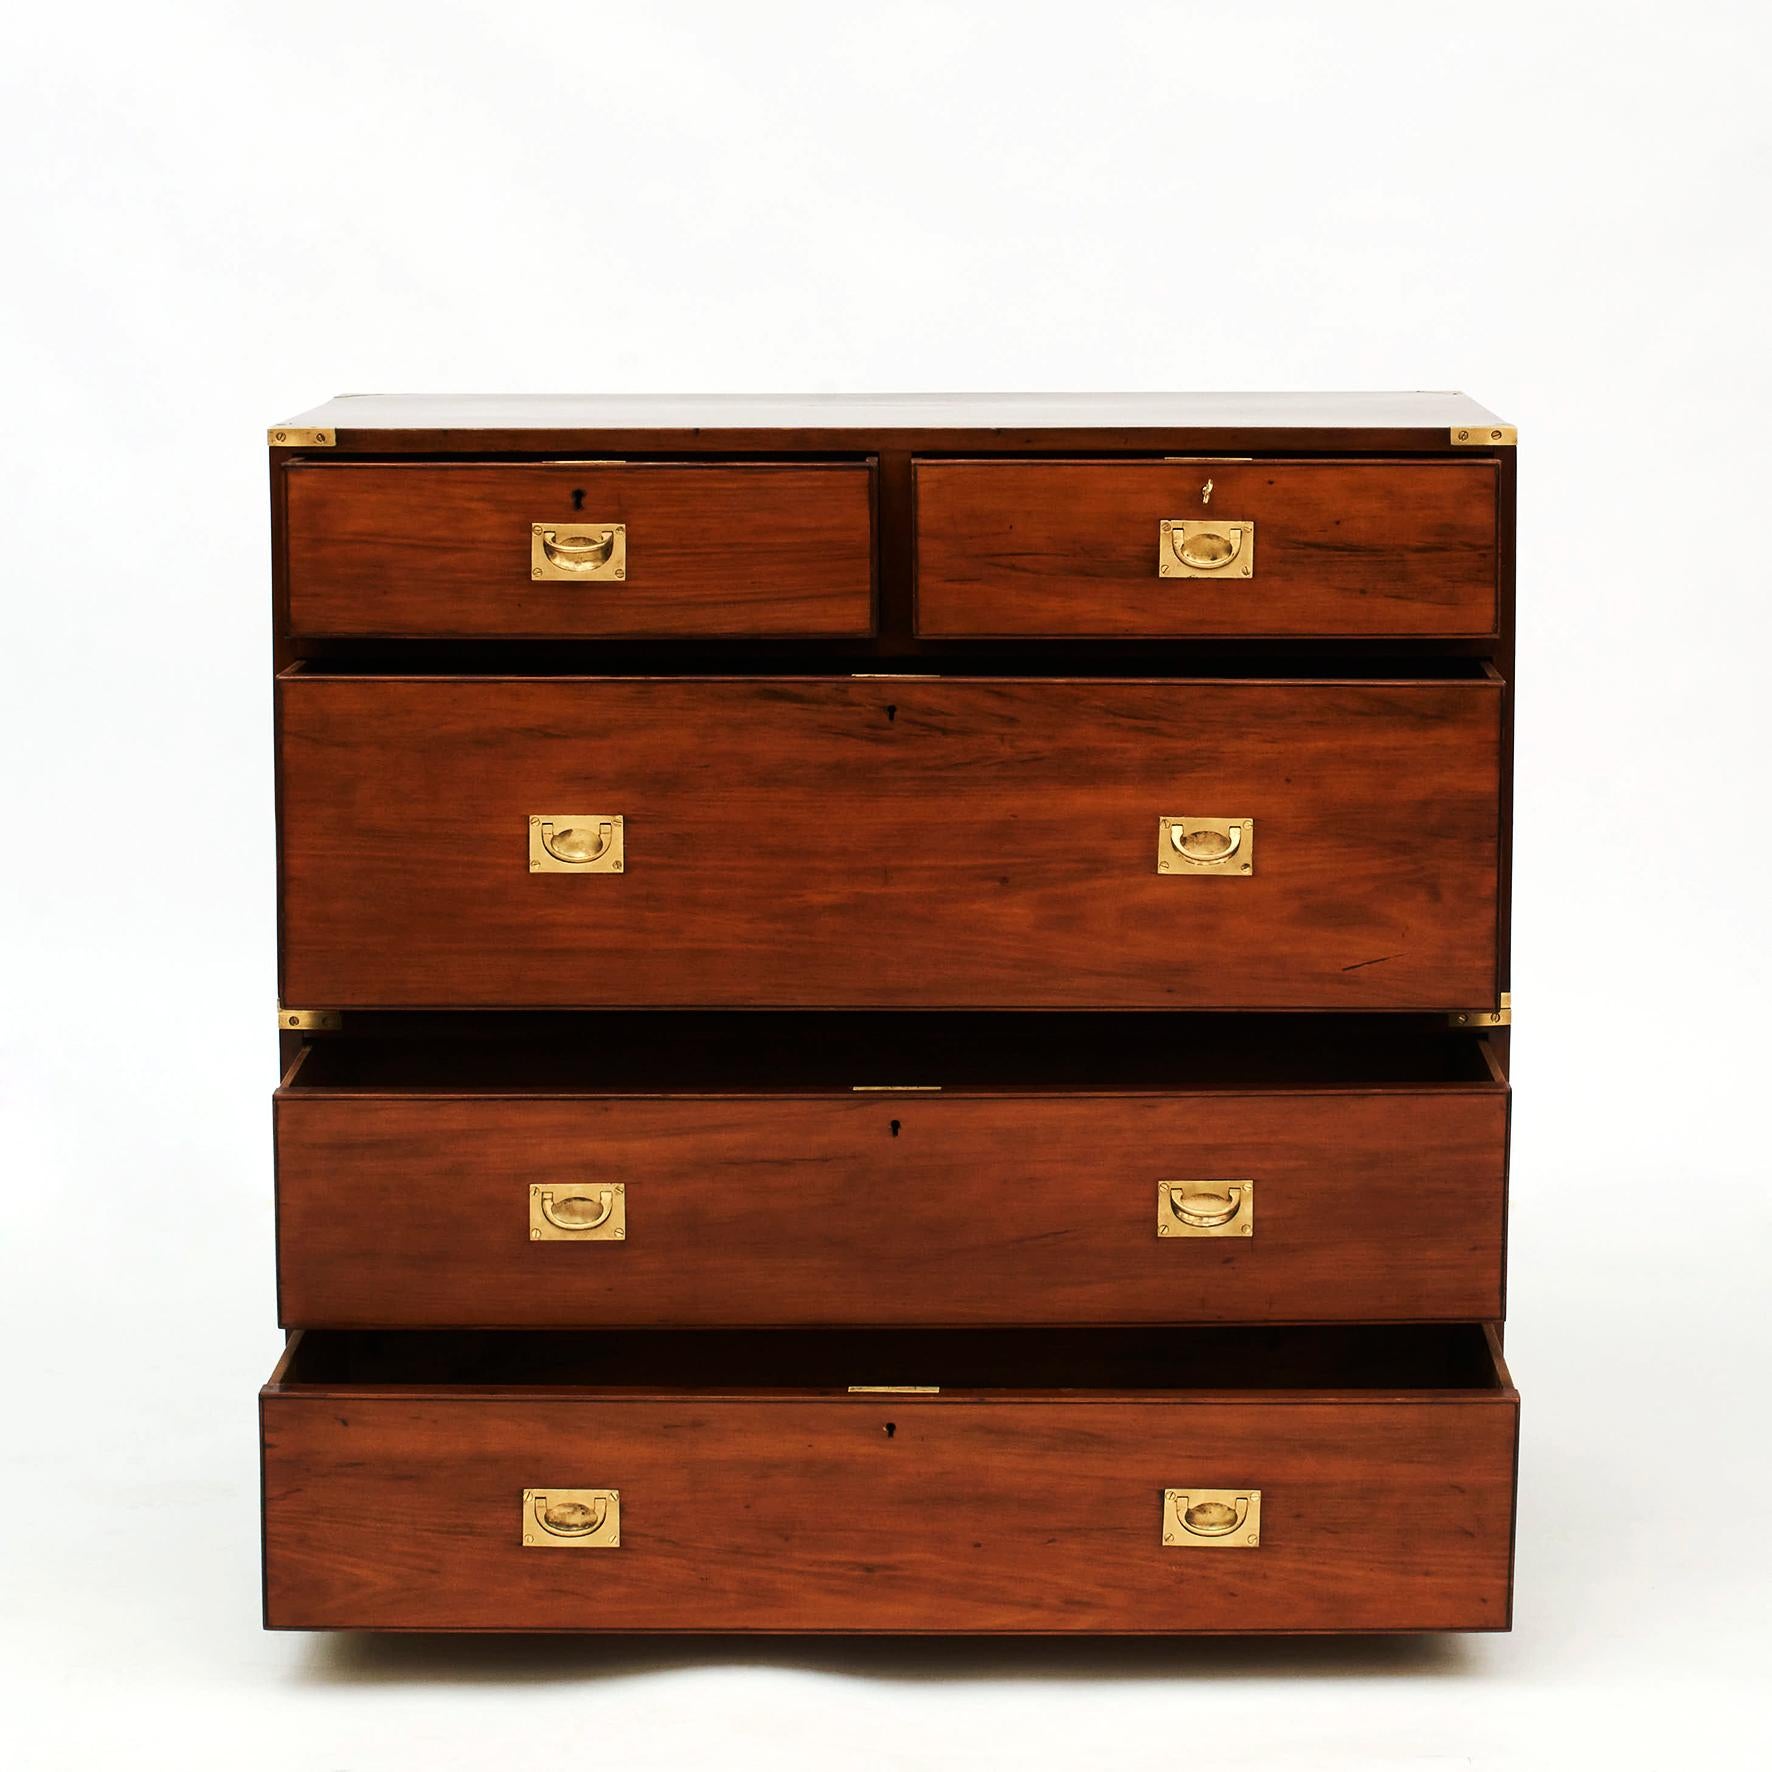 English Military Campaign chest of drawers in solid teak wood. In two parts. Original brass fittings.
England 1870-1880.
Great condition finished with a very gentle shellac hand polish (French polish).

Campaign -era chests were the travel items